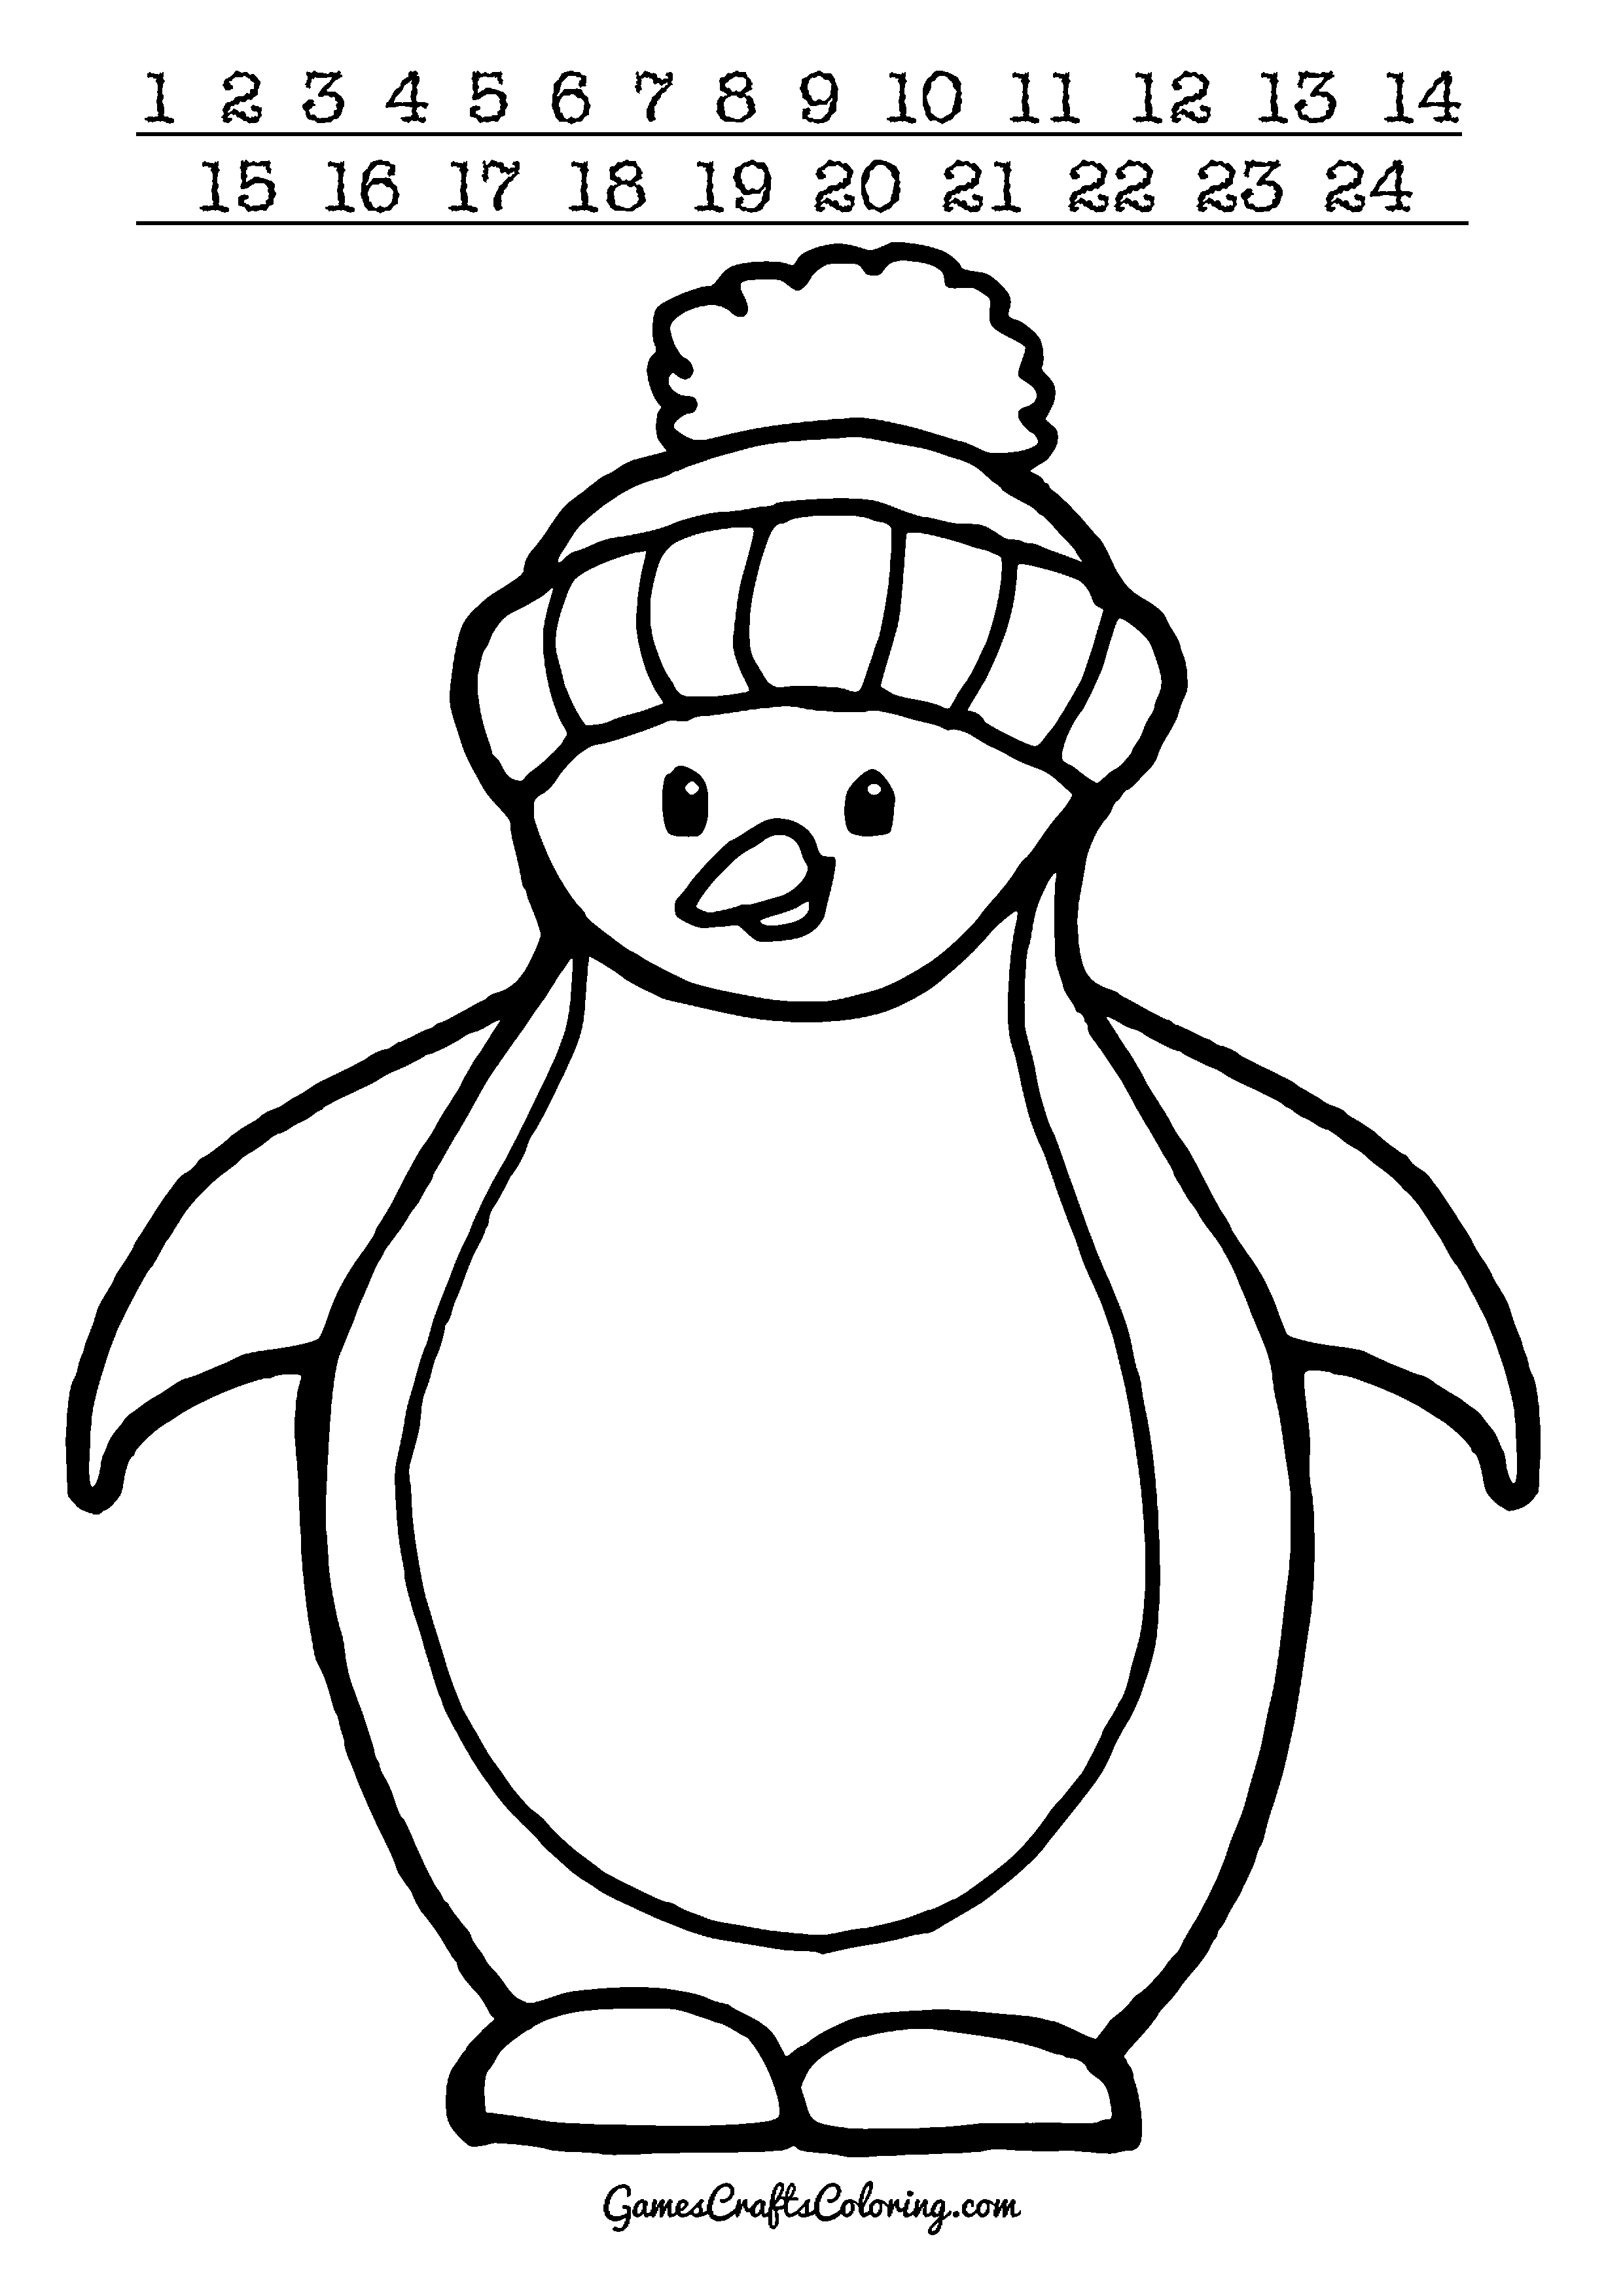 Games Crafts Coloring Printable Penguins